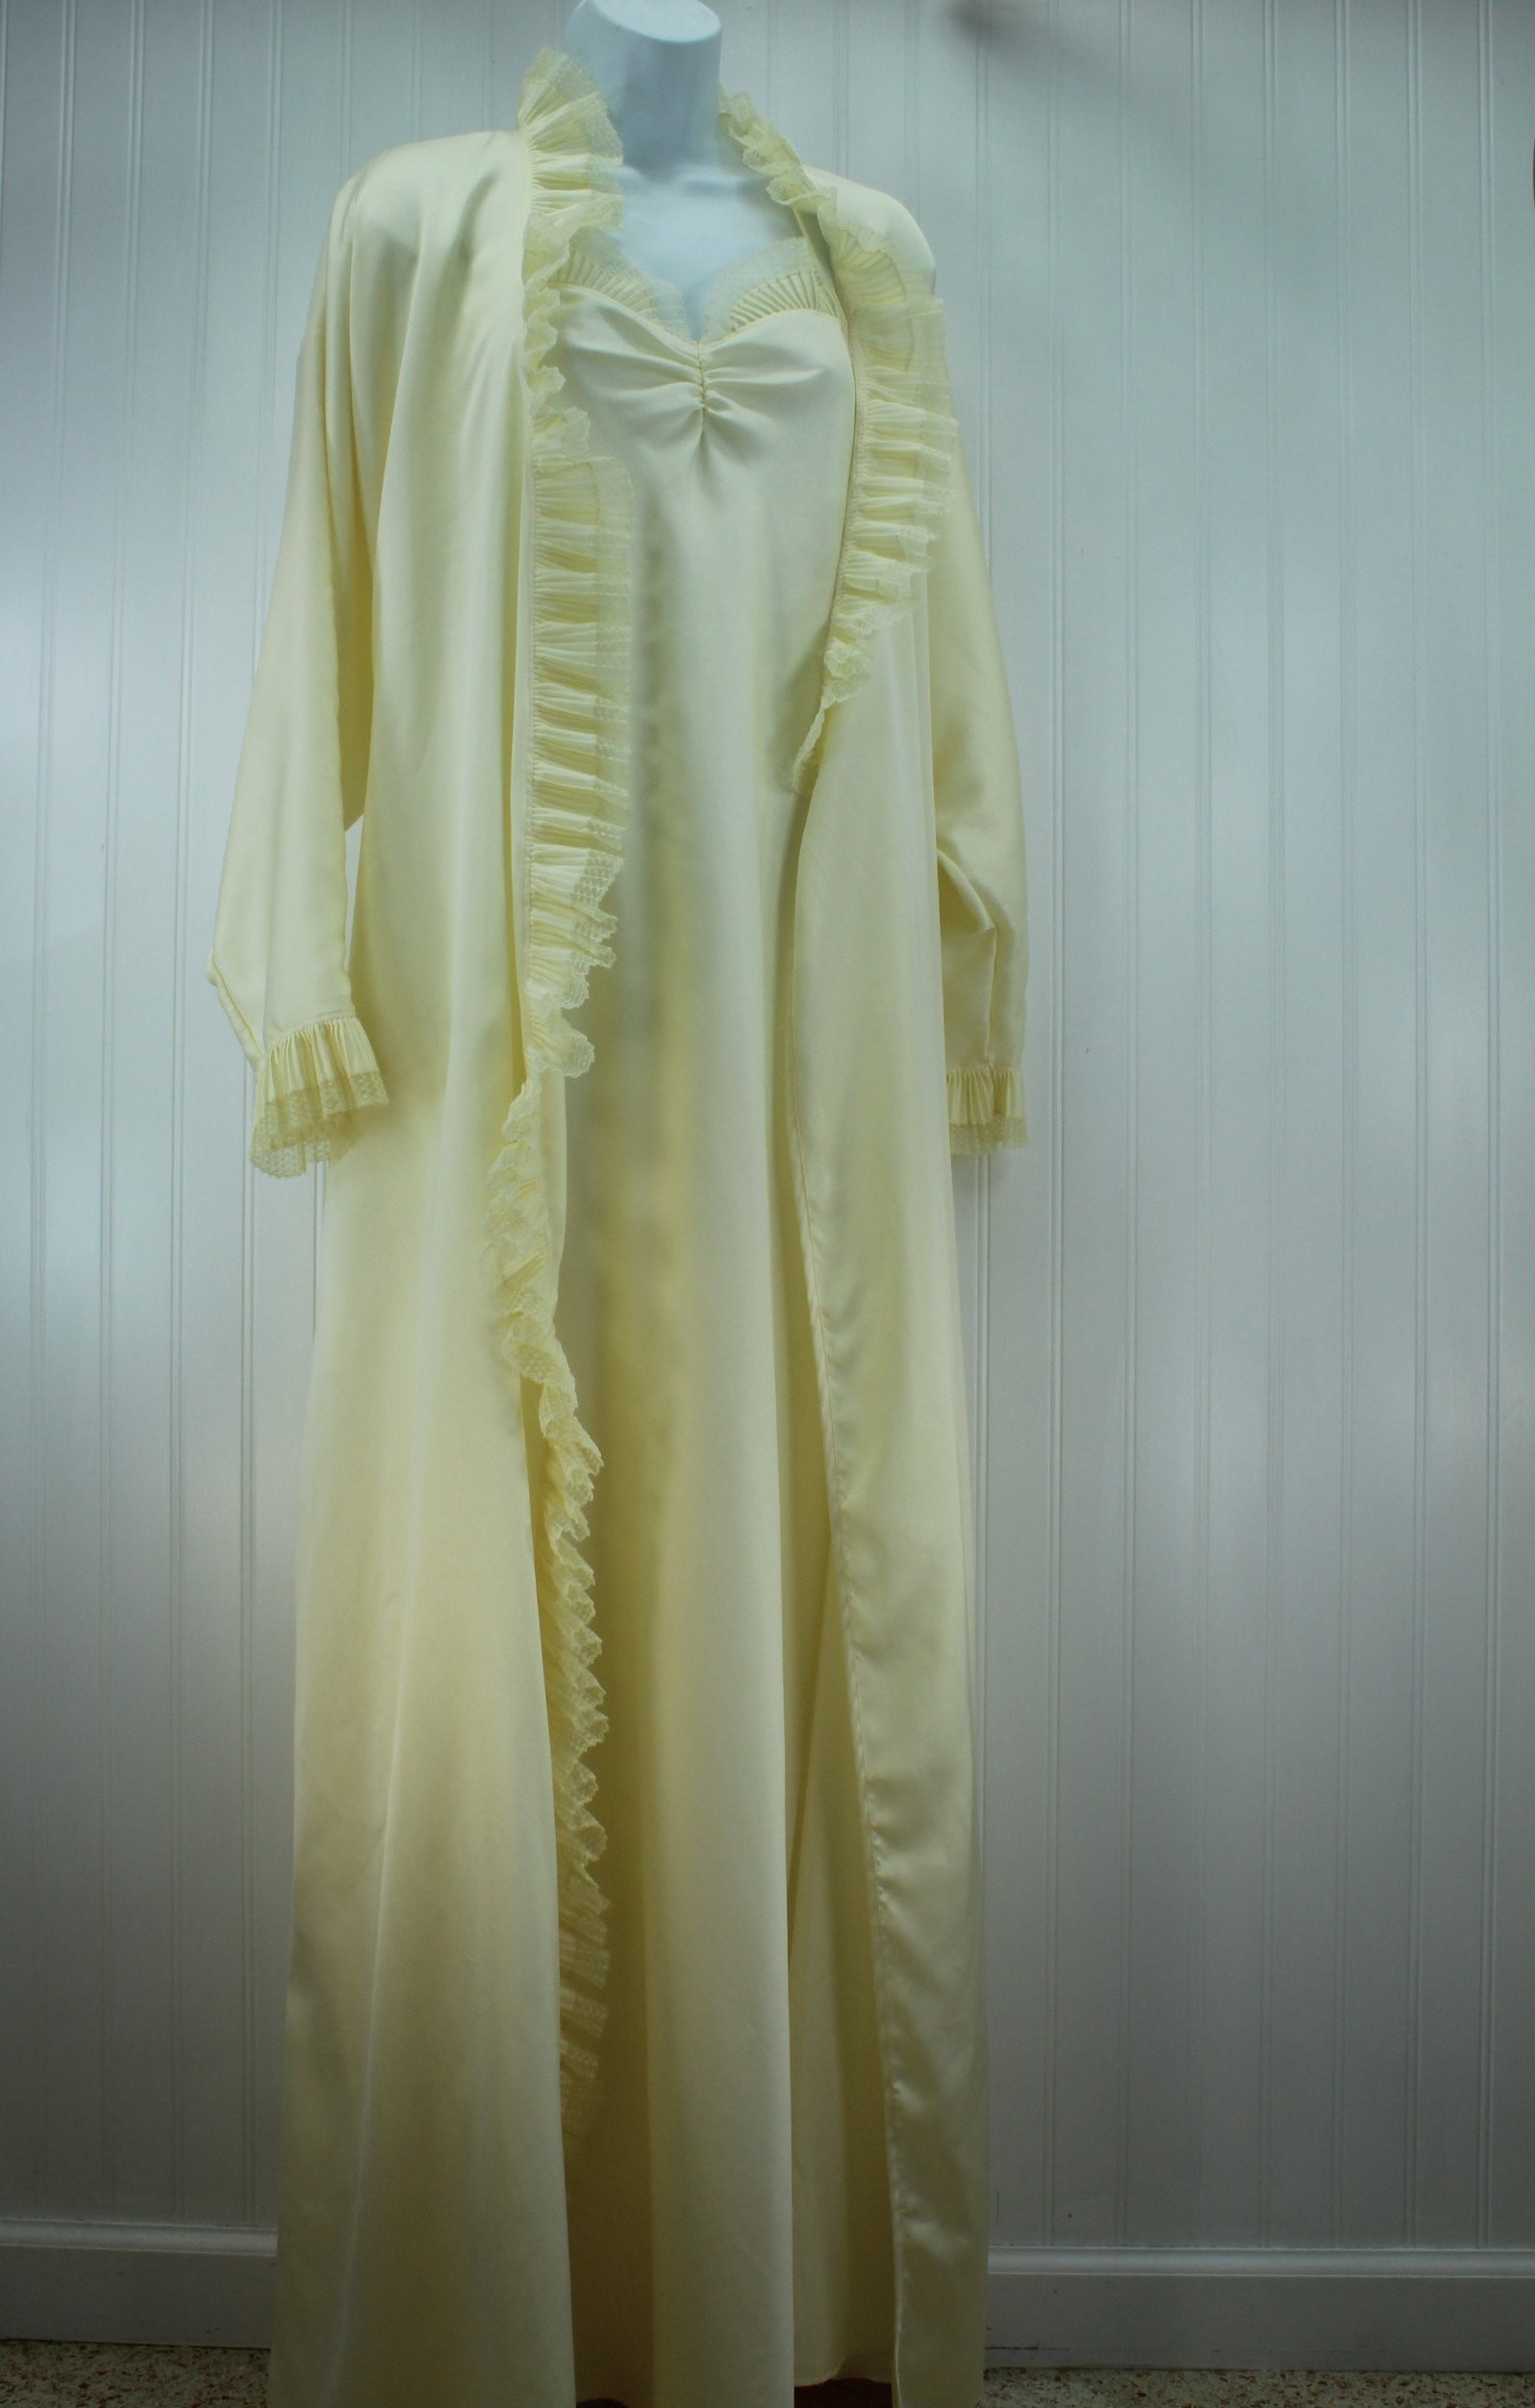 Bill Tice Nightgown Peignoir Set Ivory Pleated Polyester Lace Full Length Size Medium matching